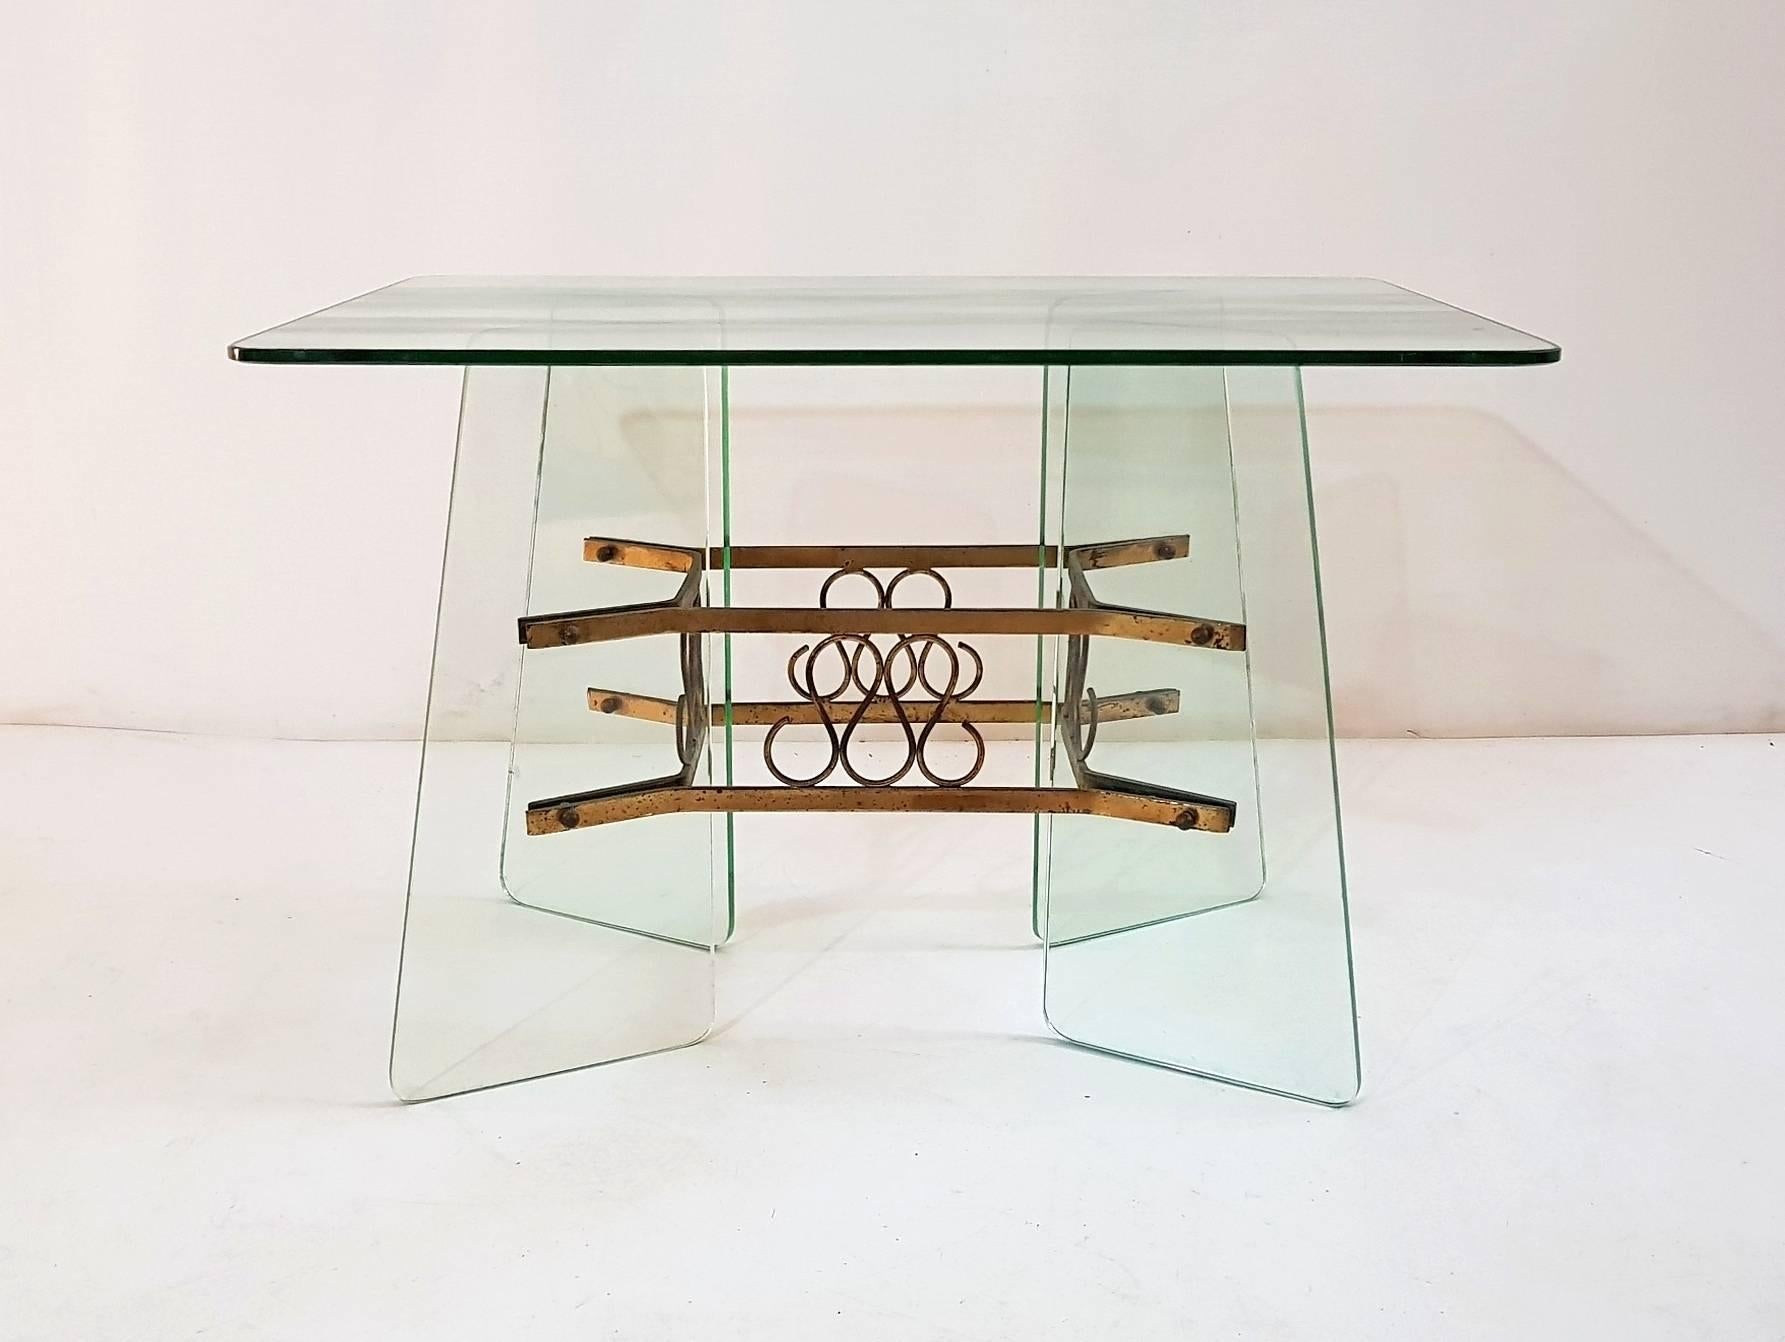 Coffee table in the manner of Fontana Arte 

The table has a glass top and four glass feet connected by a brass structure. The table has two minor chippings but they don't affect the look or quality.